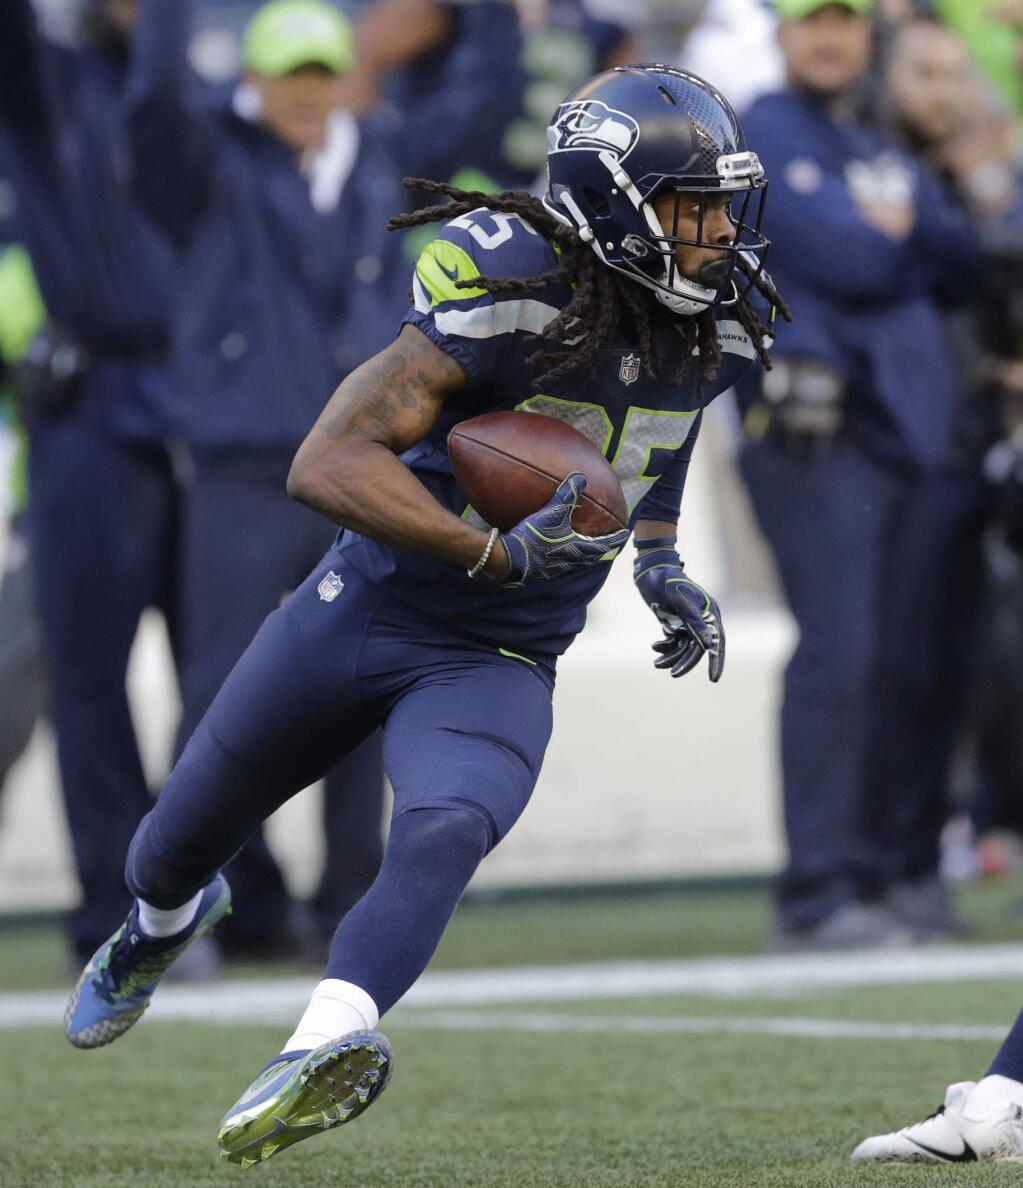 In this Oct. 29, 2017, file photo, Seattle Seahawks cornerback Richard Sherman runs after he intercepted a pass from Houston Texans quarterback Deshaun Watson late in the second half in Seattle. (AP Photo/Stephen Brashear, File)